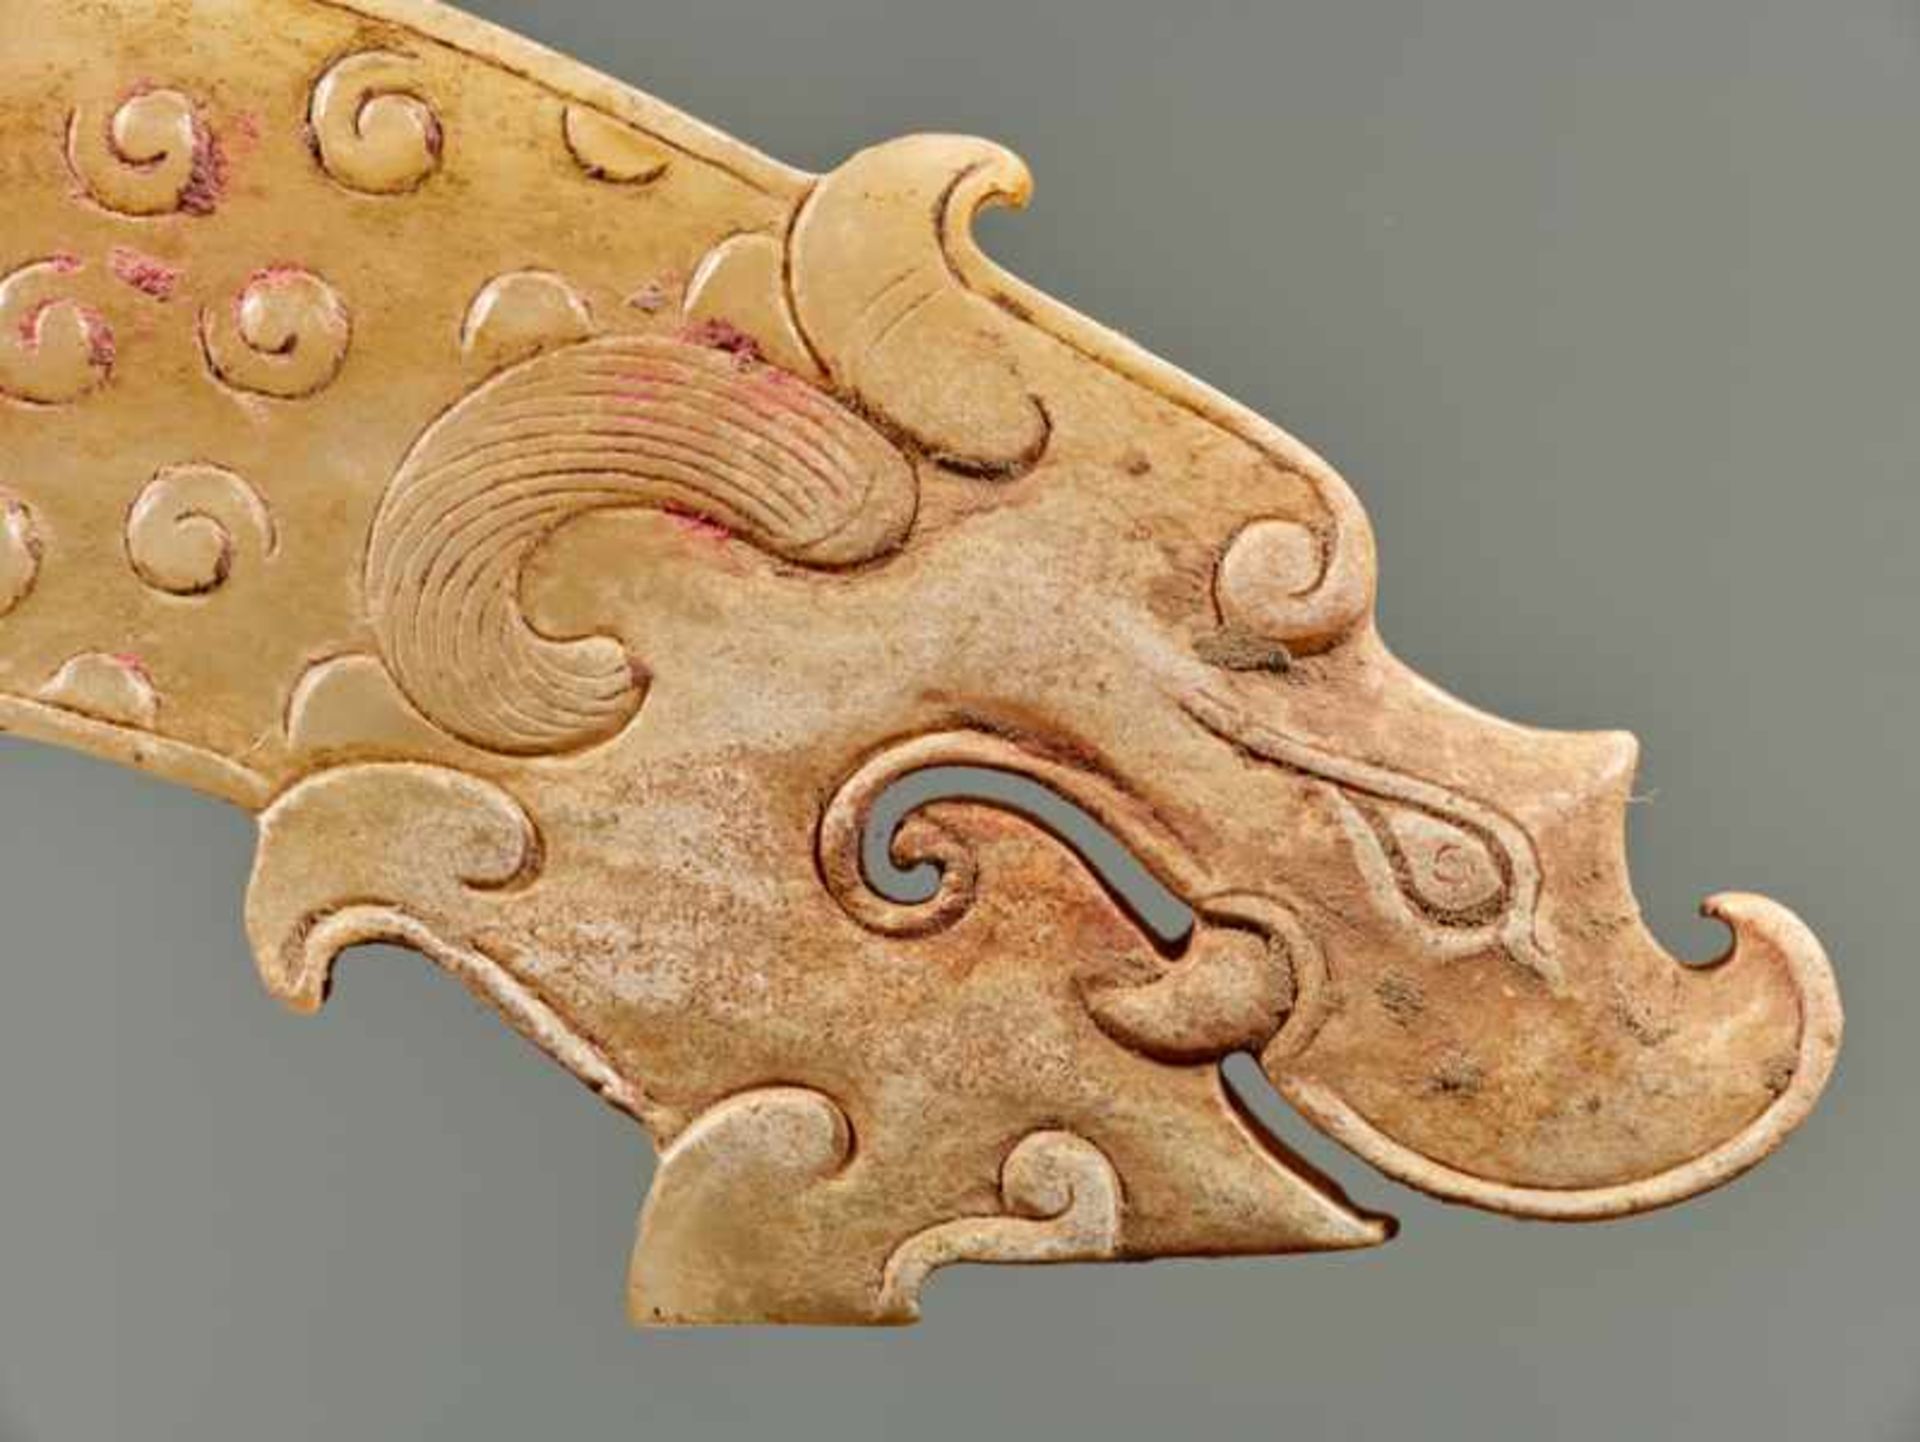 A POWERFUL HUANG ARCHED PENDANT WITH FINELY DETAILED DRAGON HEADS AND A PATTERN OF RAISED CURLS - Image 10 of 13